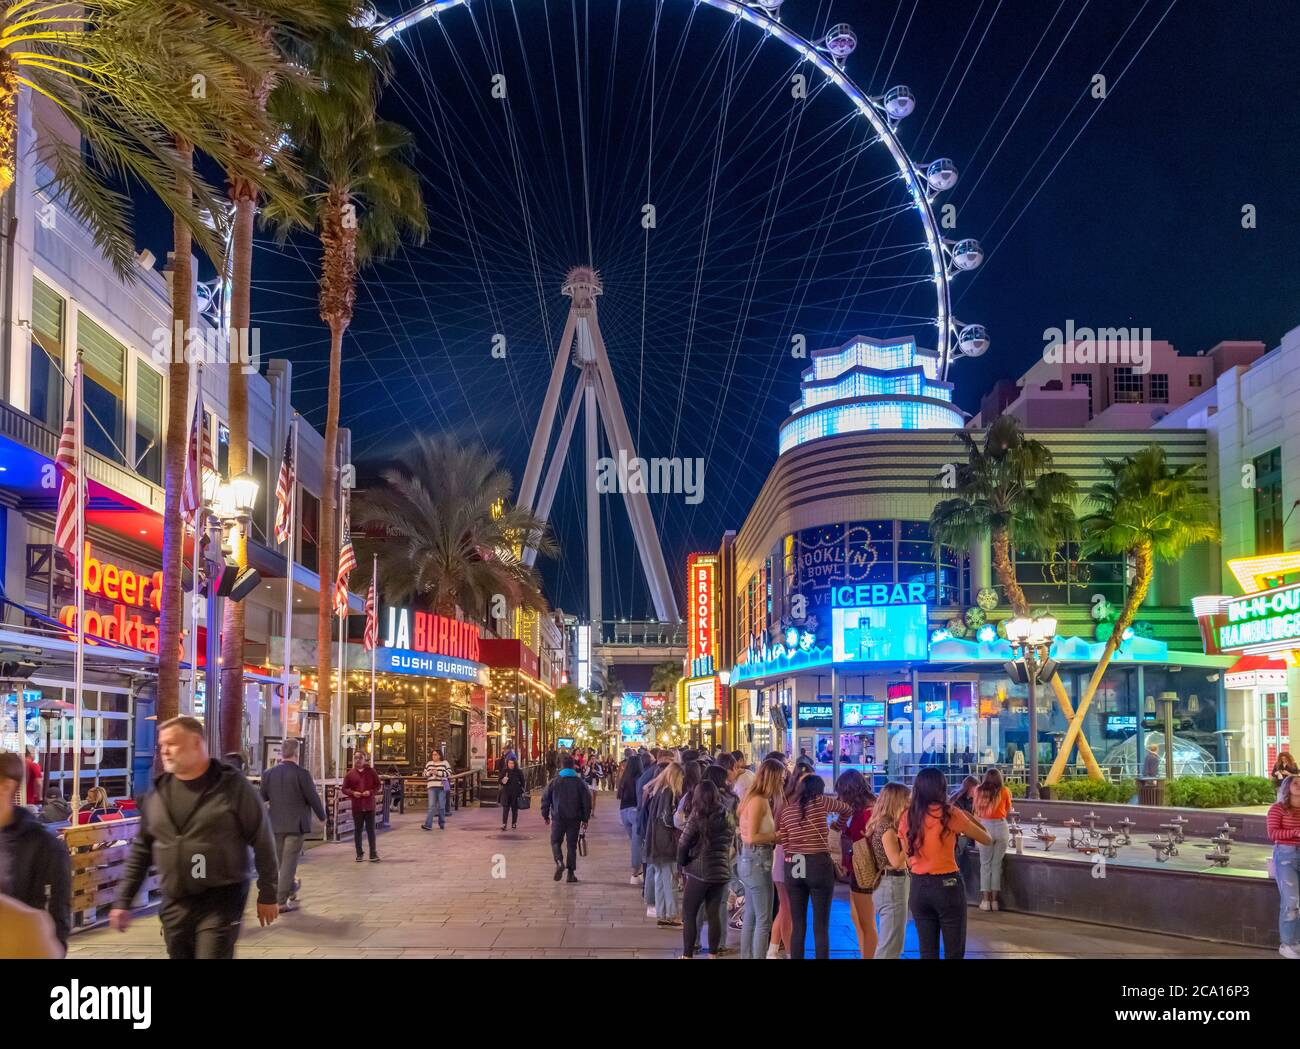 The Linq Promenade at night. Shops, bars and restaurants on The Linq Promenade looking towards the High Roller ferris wheel,  Las Vegas, Nevada, USA Stock Photo